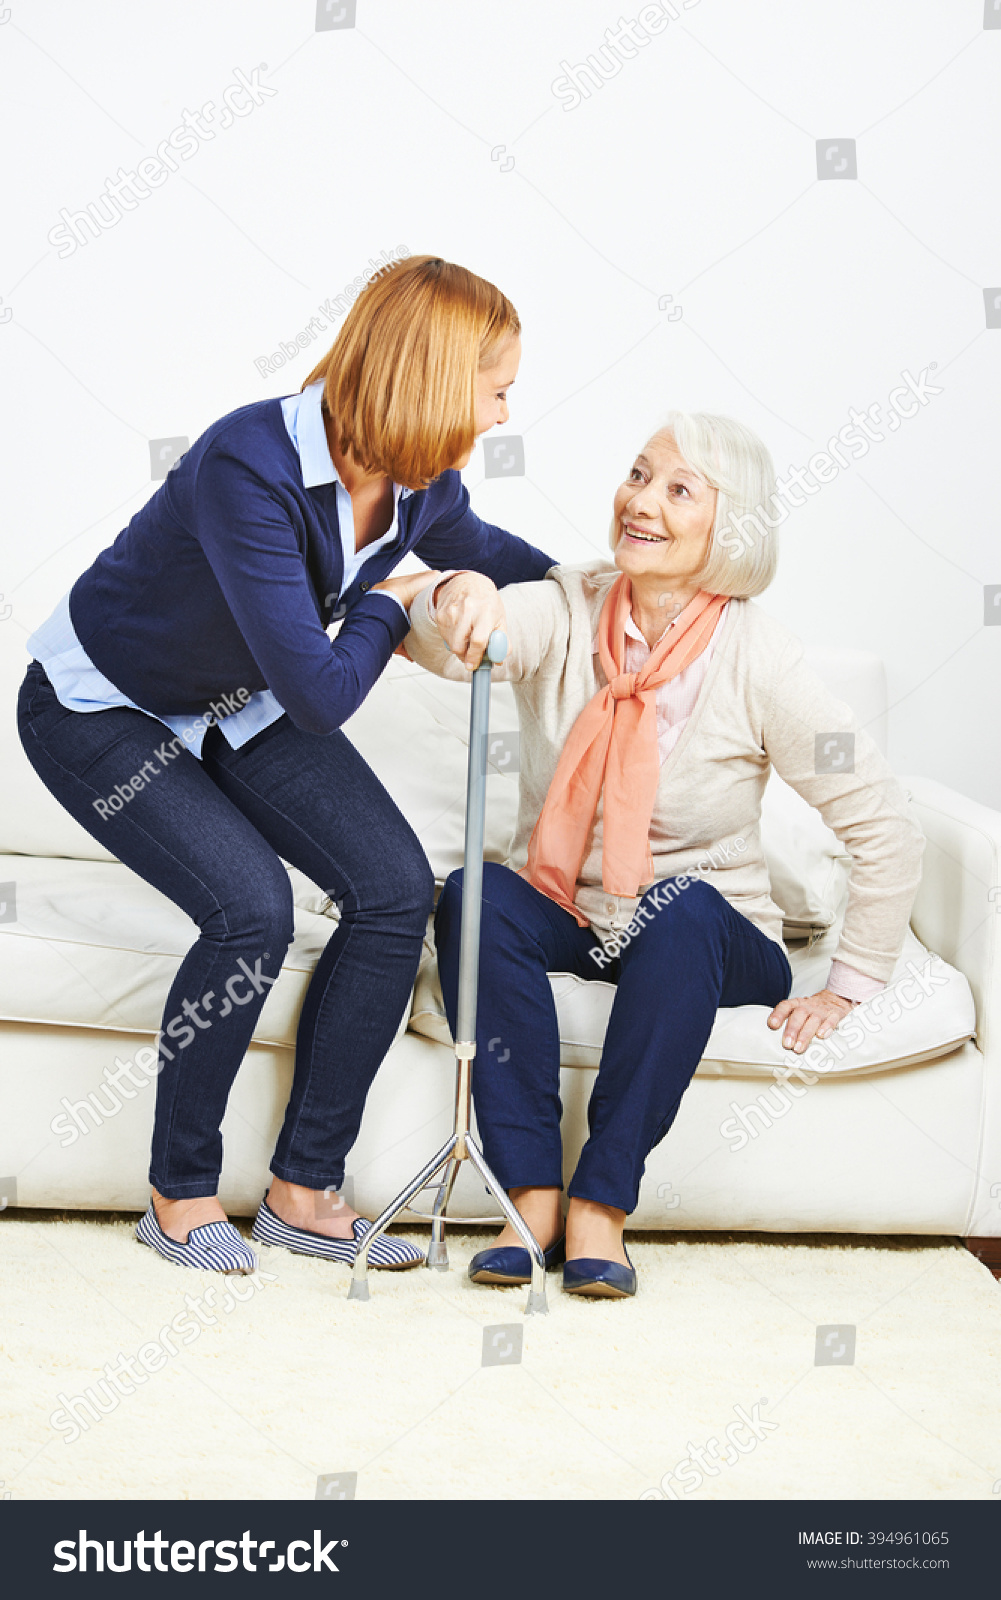 Woman helping senior woman with cane getting up from a sofa #394961065